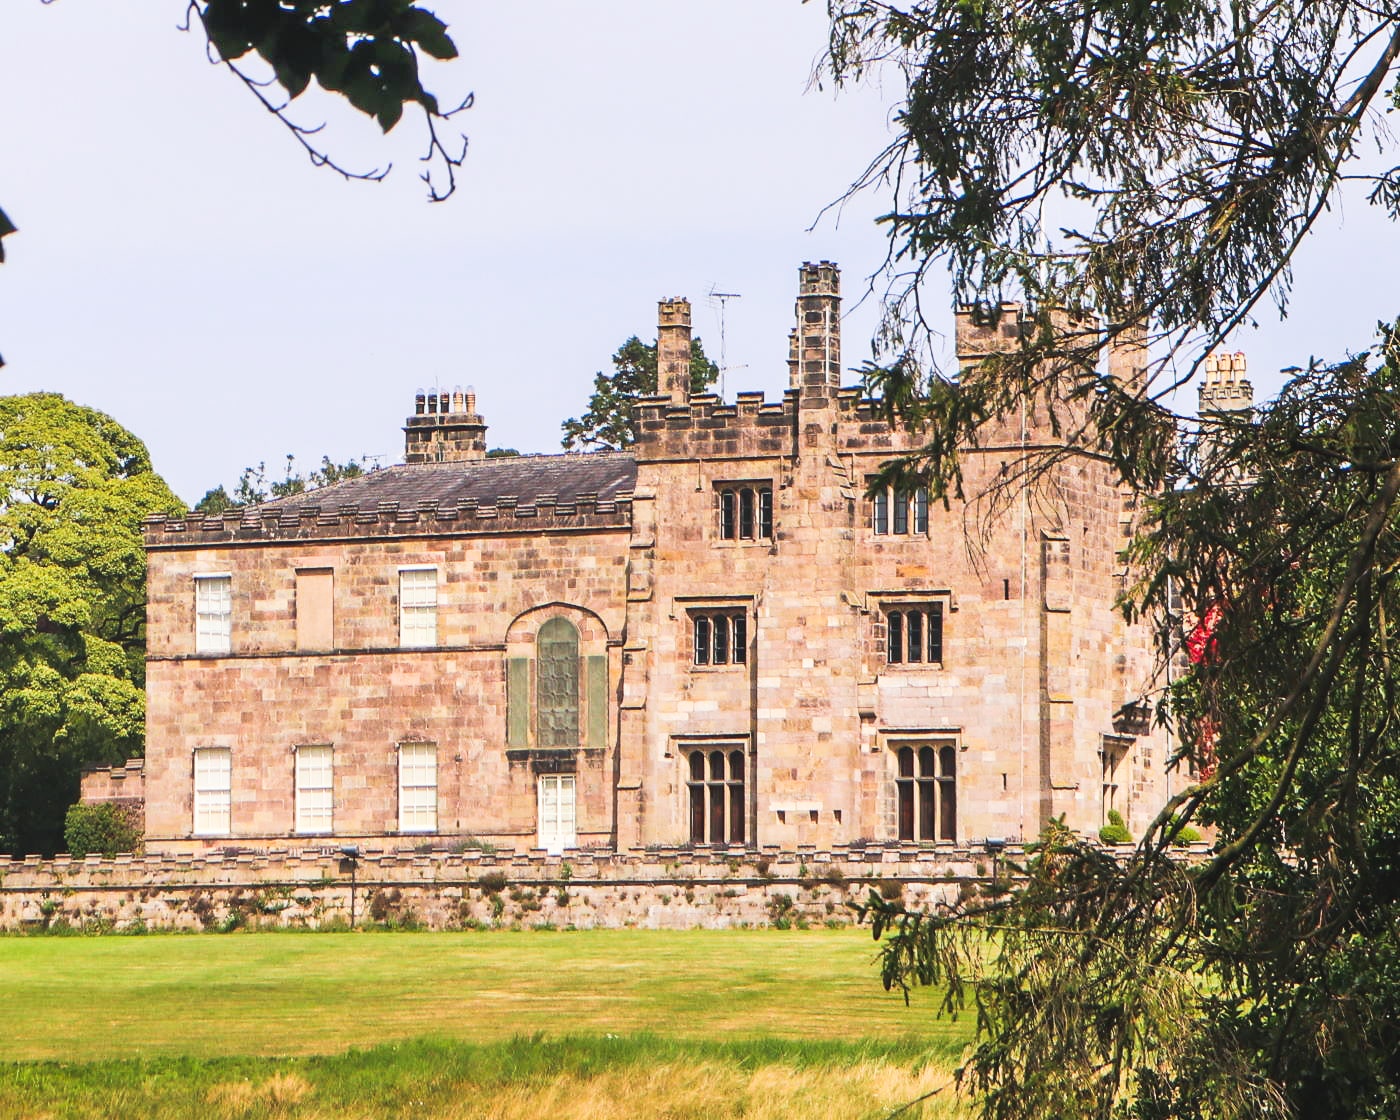 View of Ripley castle, North Yorkshire from the Deer Park
